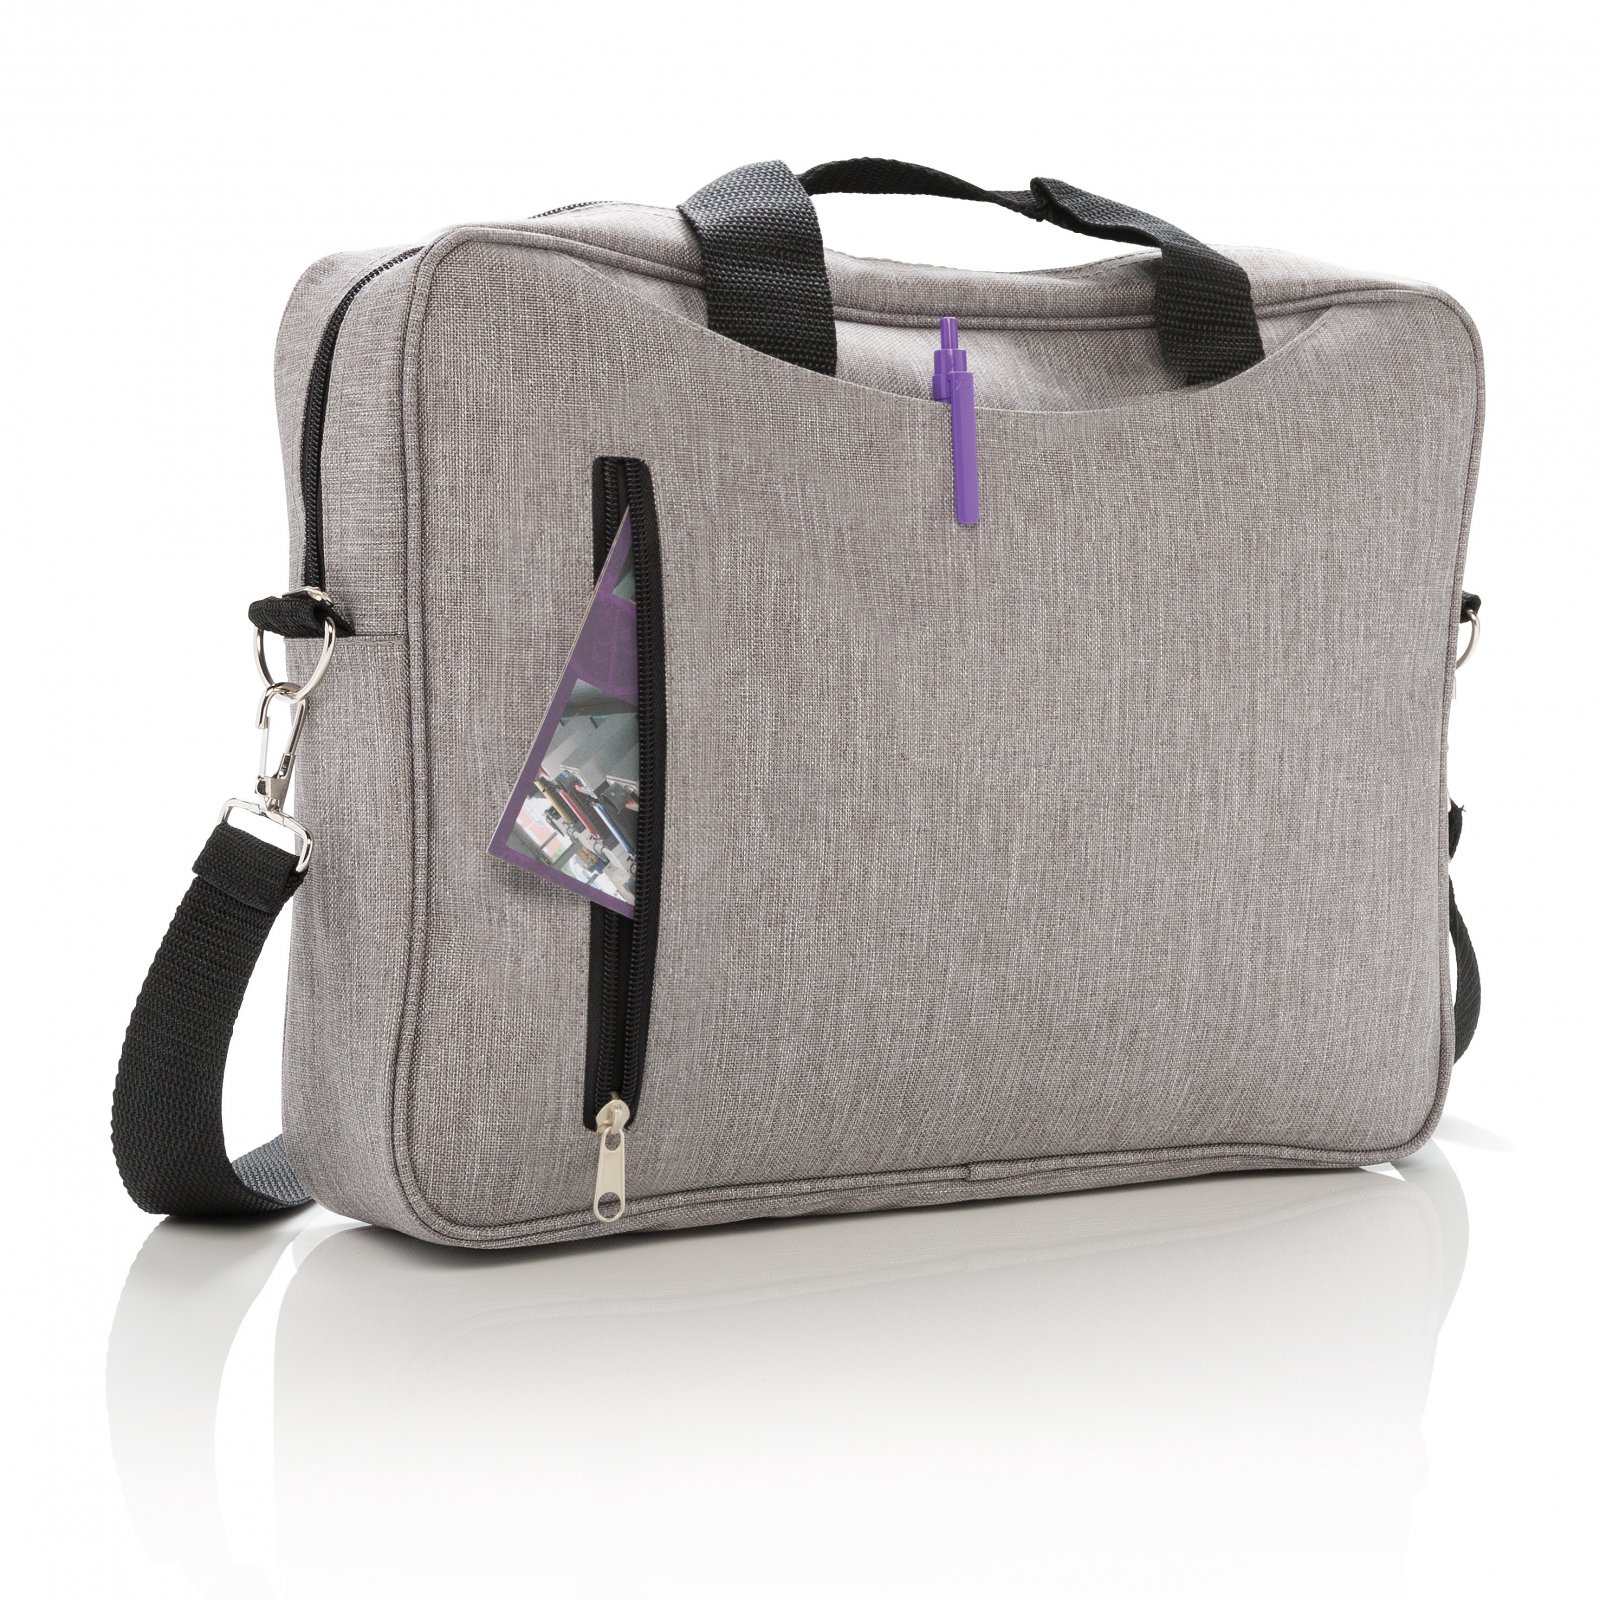 Promotional Halstead Laptop Bag, Personalised by MoJo Promotions